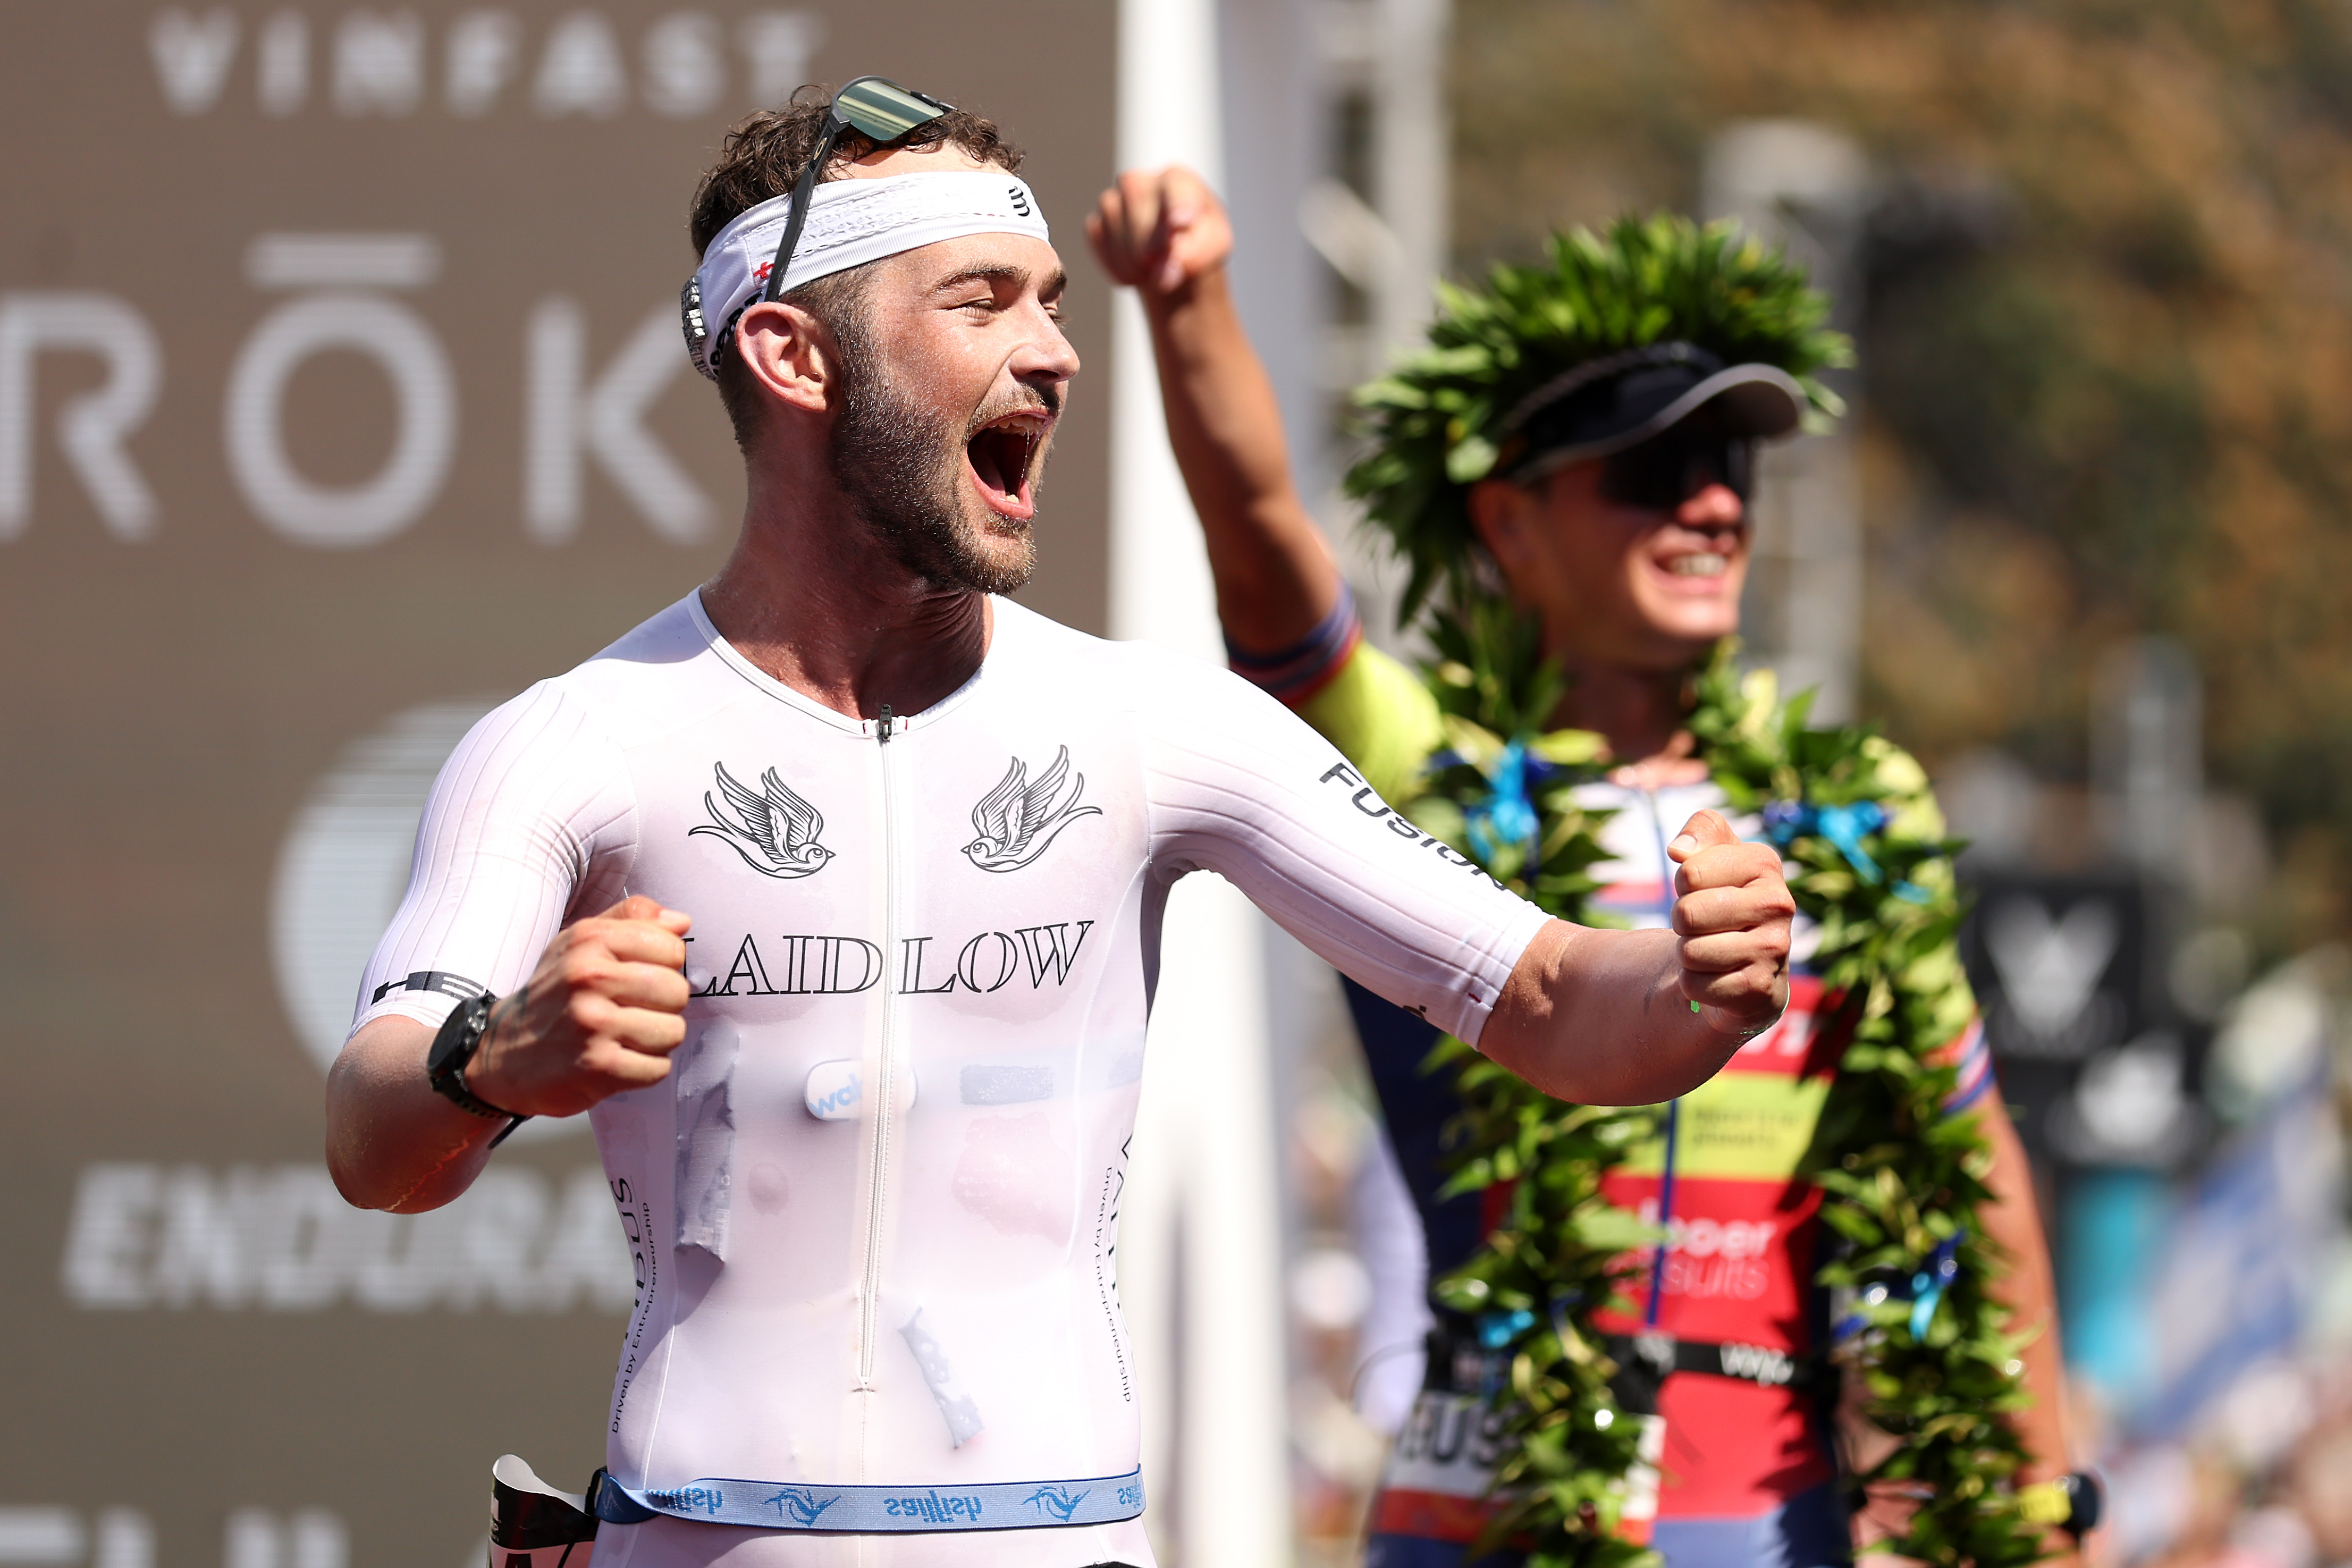 Laidlow celebrates his second place finish in Kona last year, with 2022 Ironman world champ Gustav Iden in the background (Credit: Ezra Shaw/Getty Images for Ironman)